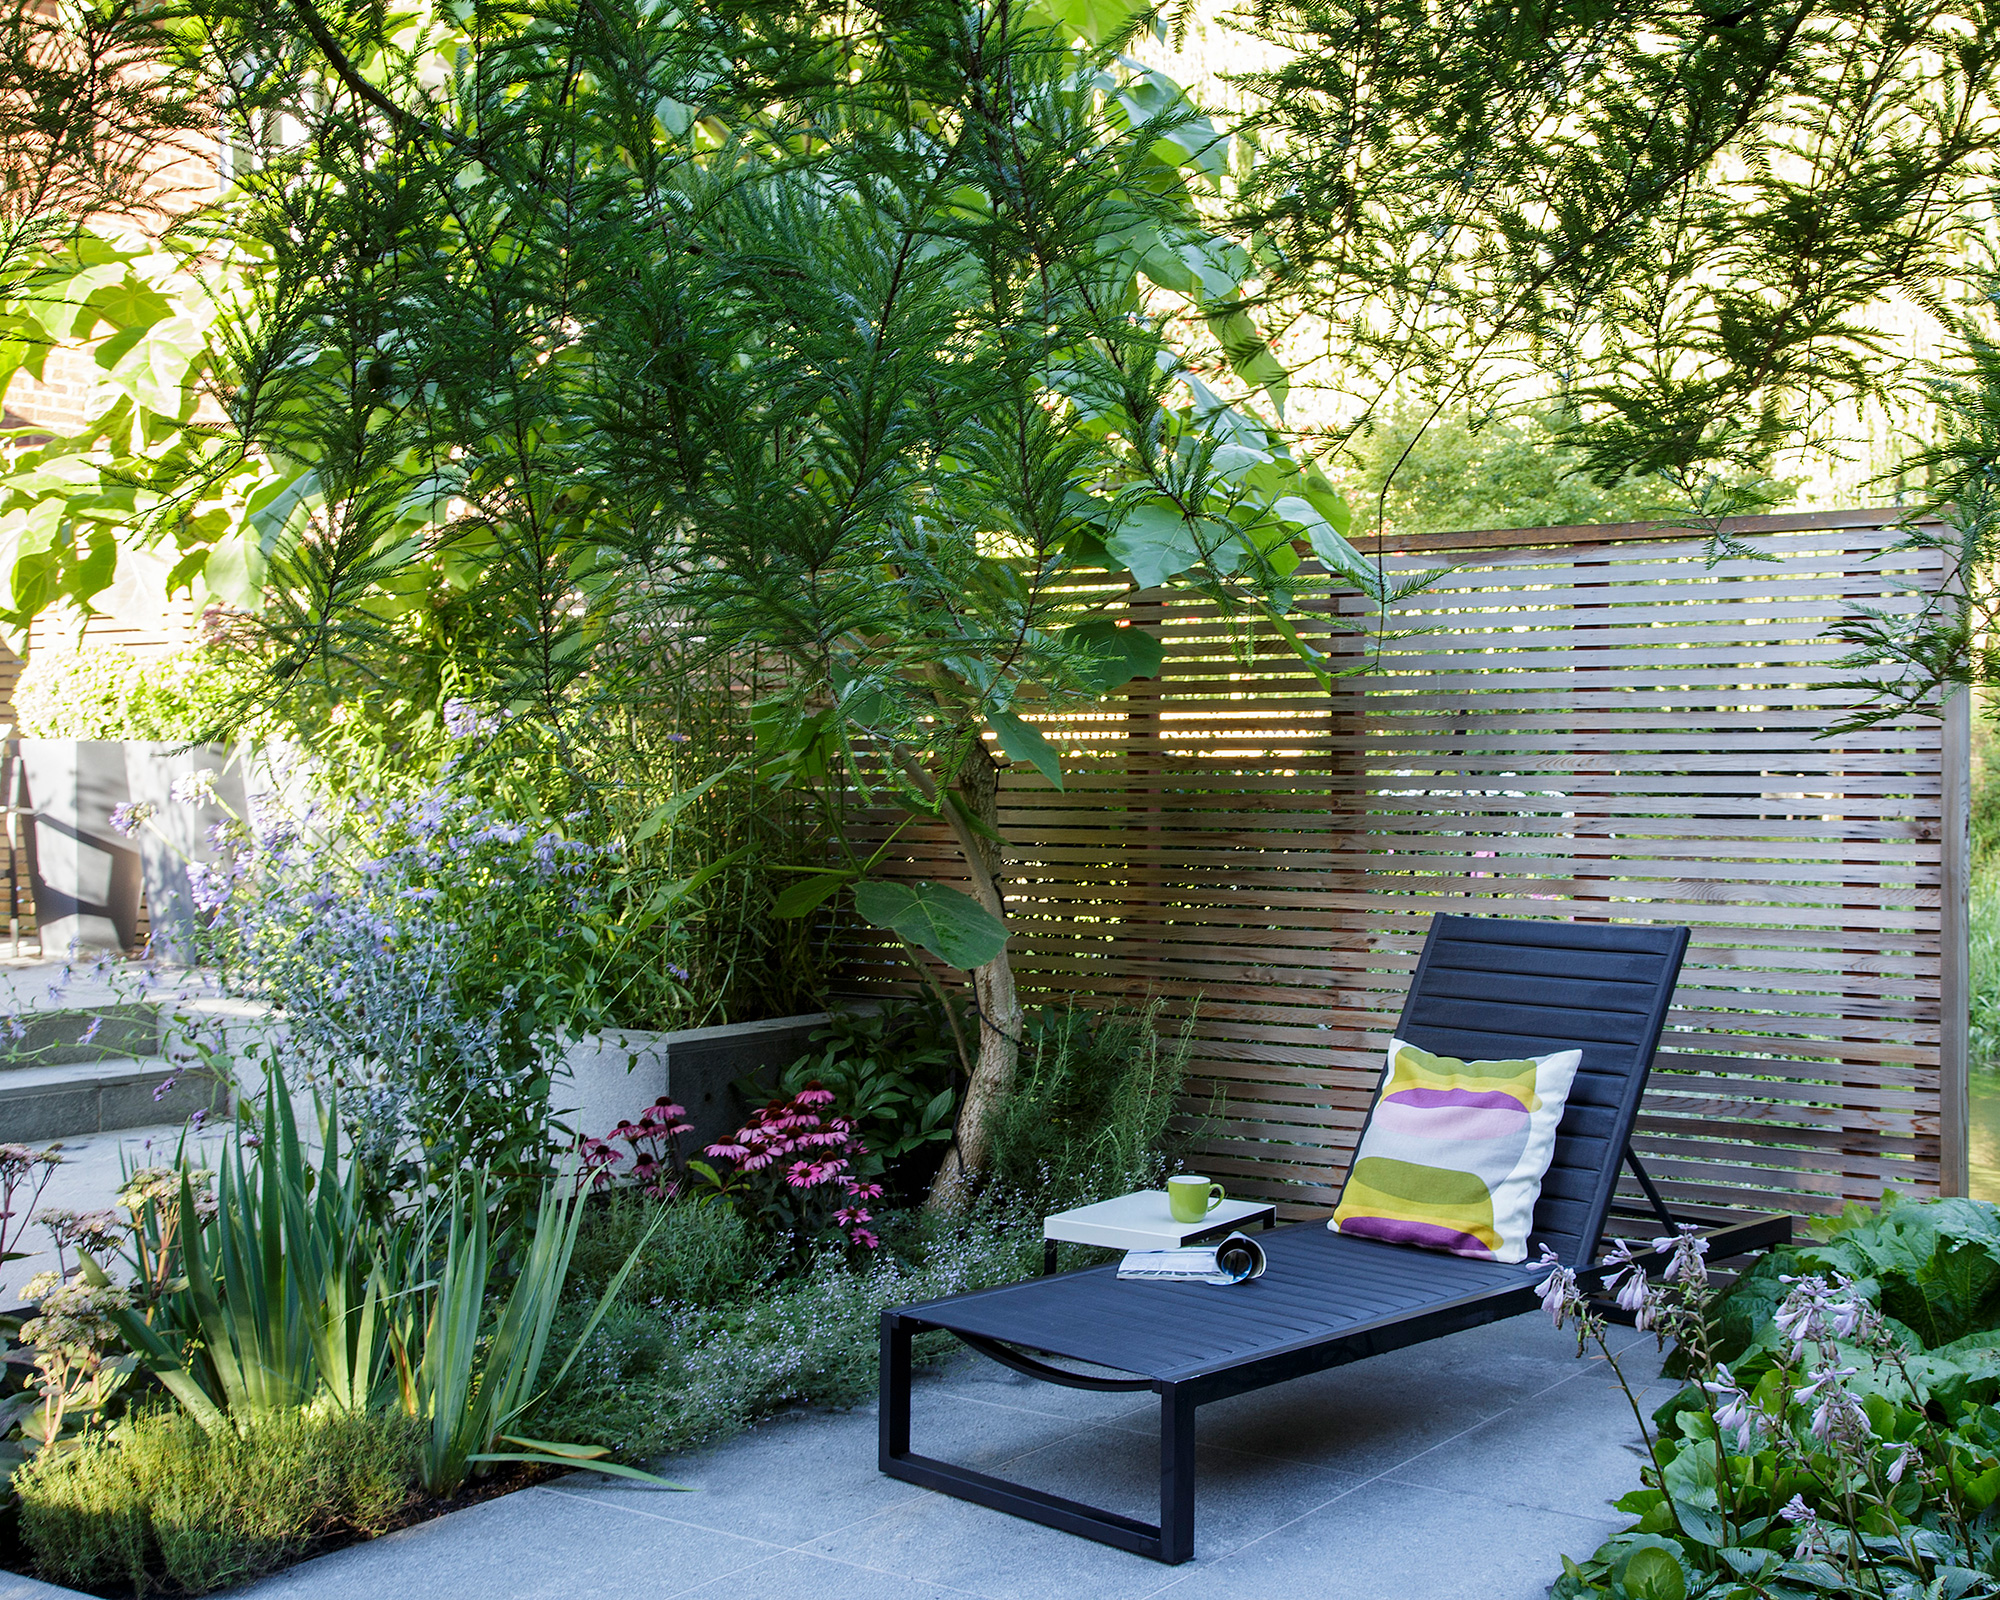 Patio planting ideas in a shaded garden with sun lounger and screened fence.